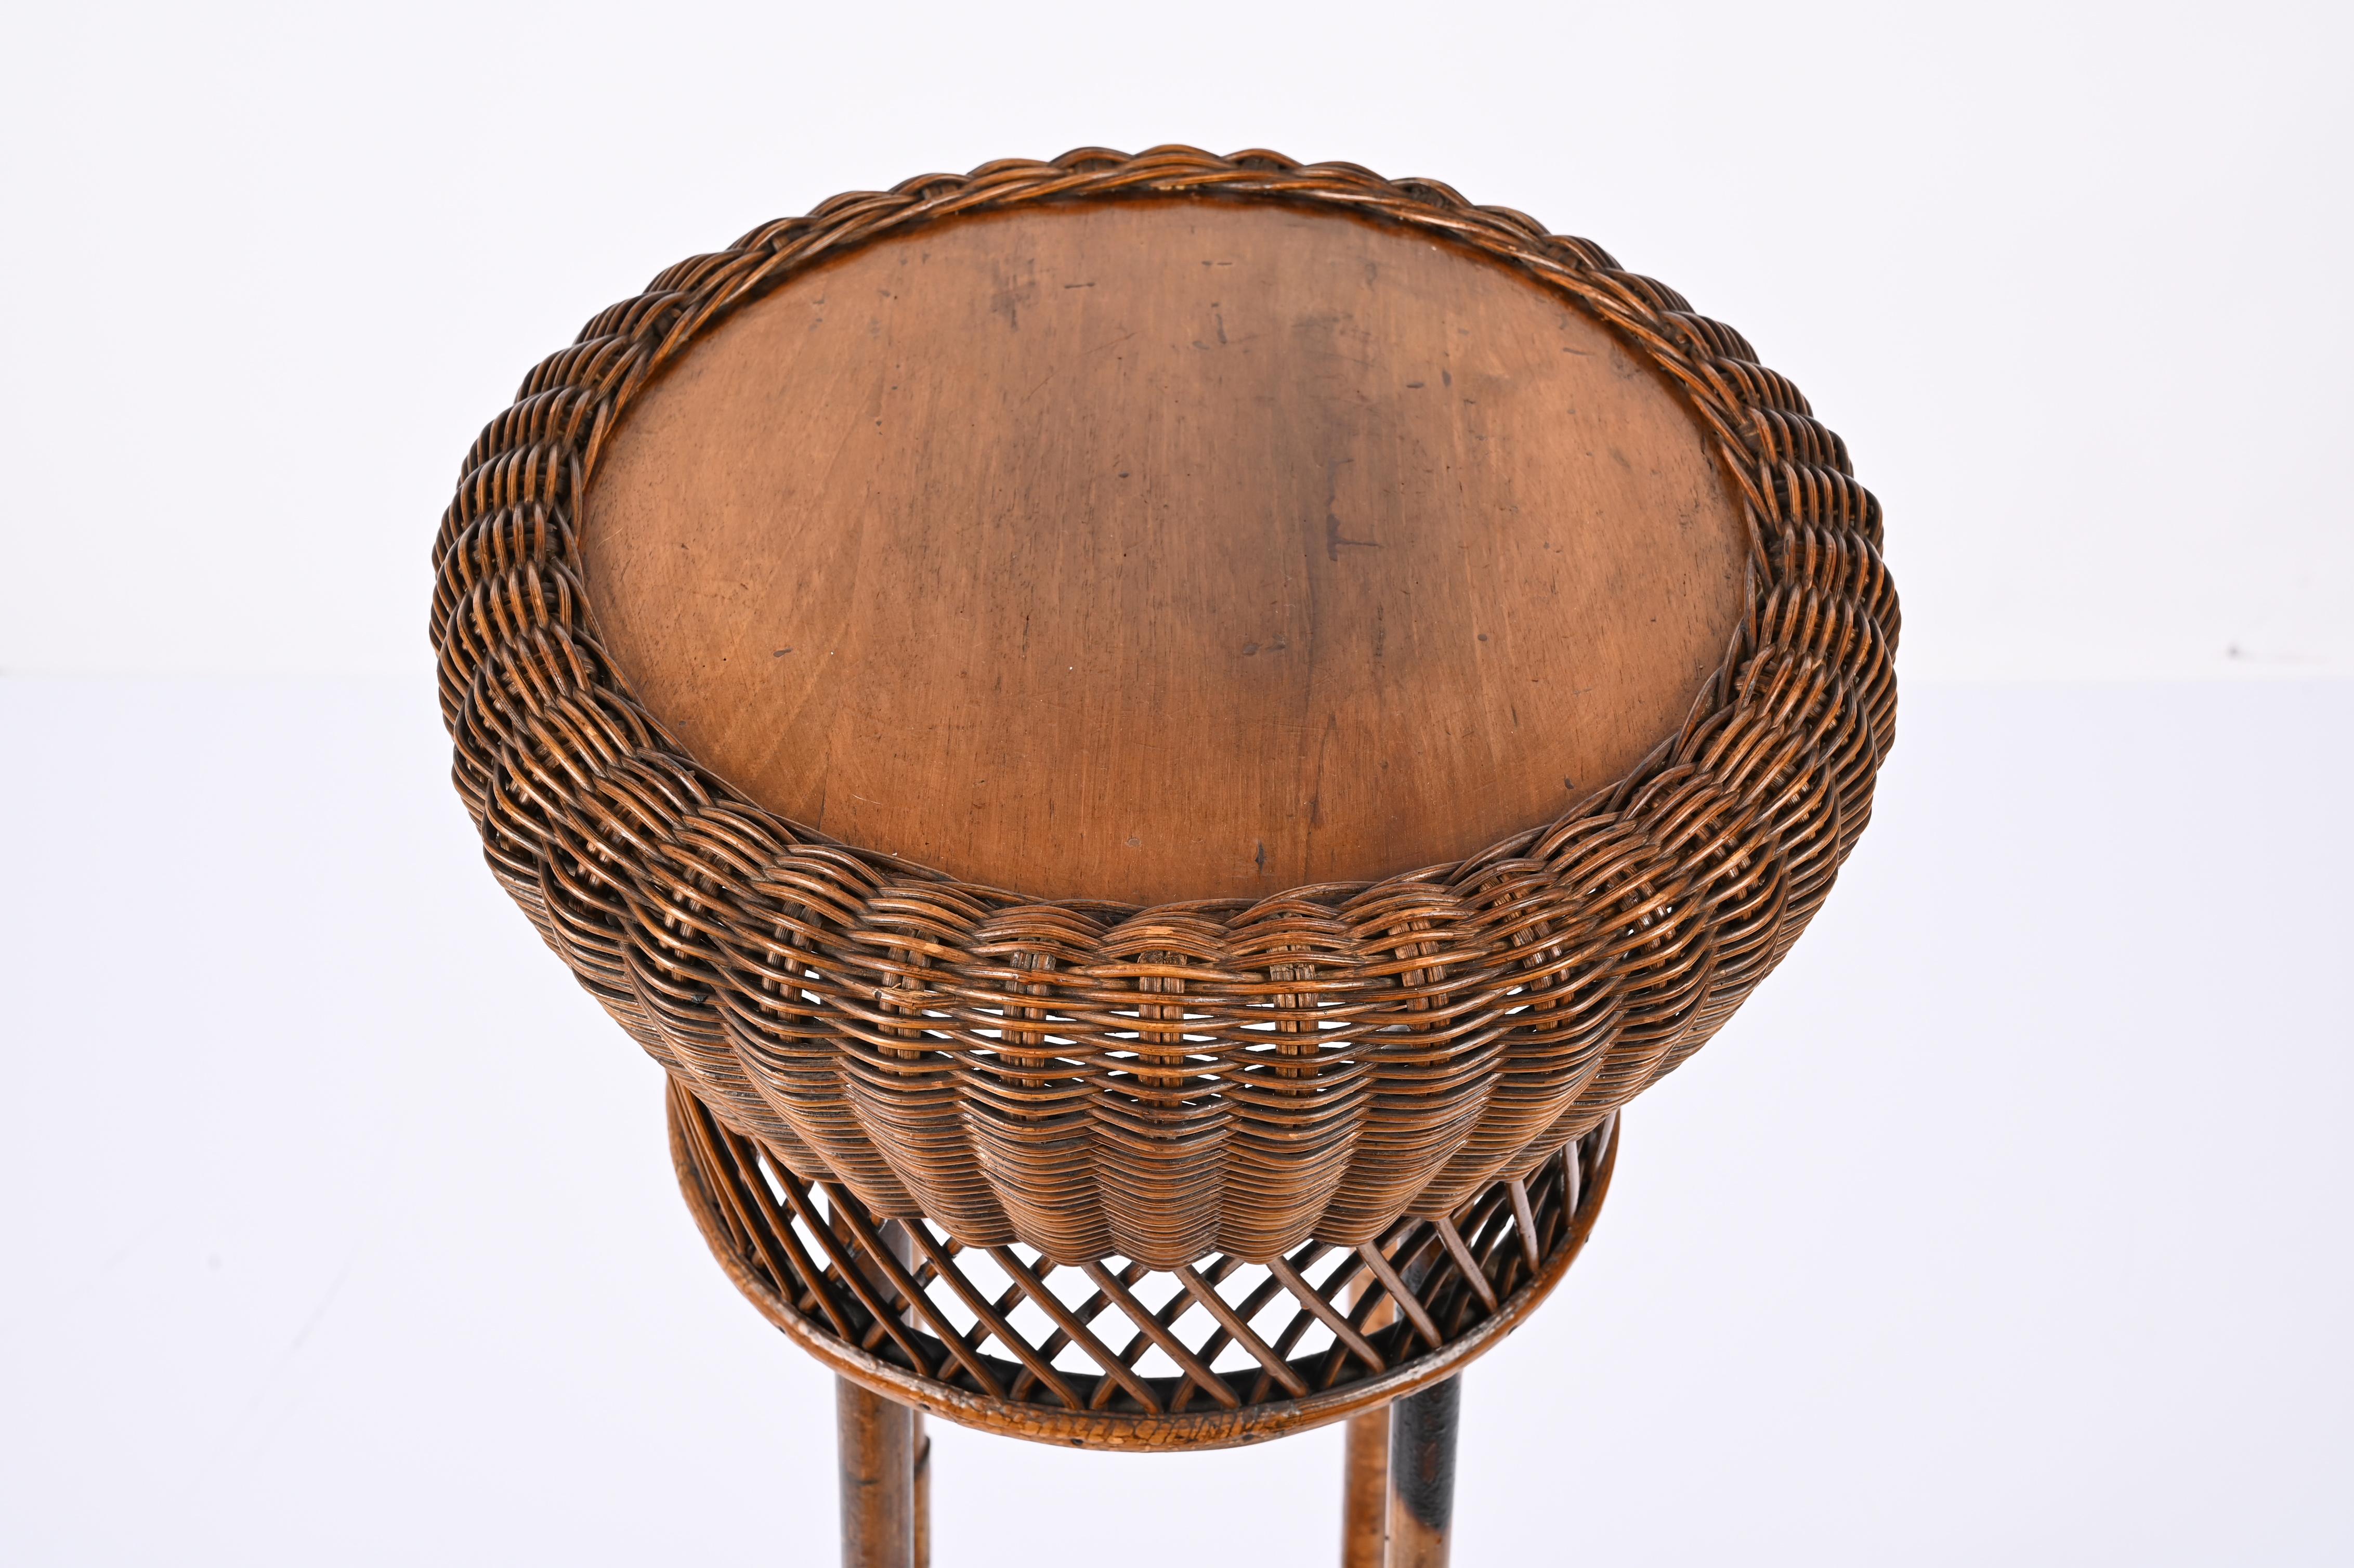 Midcentury Double-Levelled Circular Rattan and Bamboo Italian Pedestal, 1950s For Sale 8